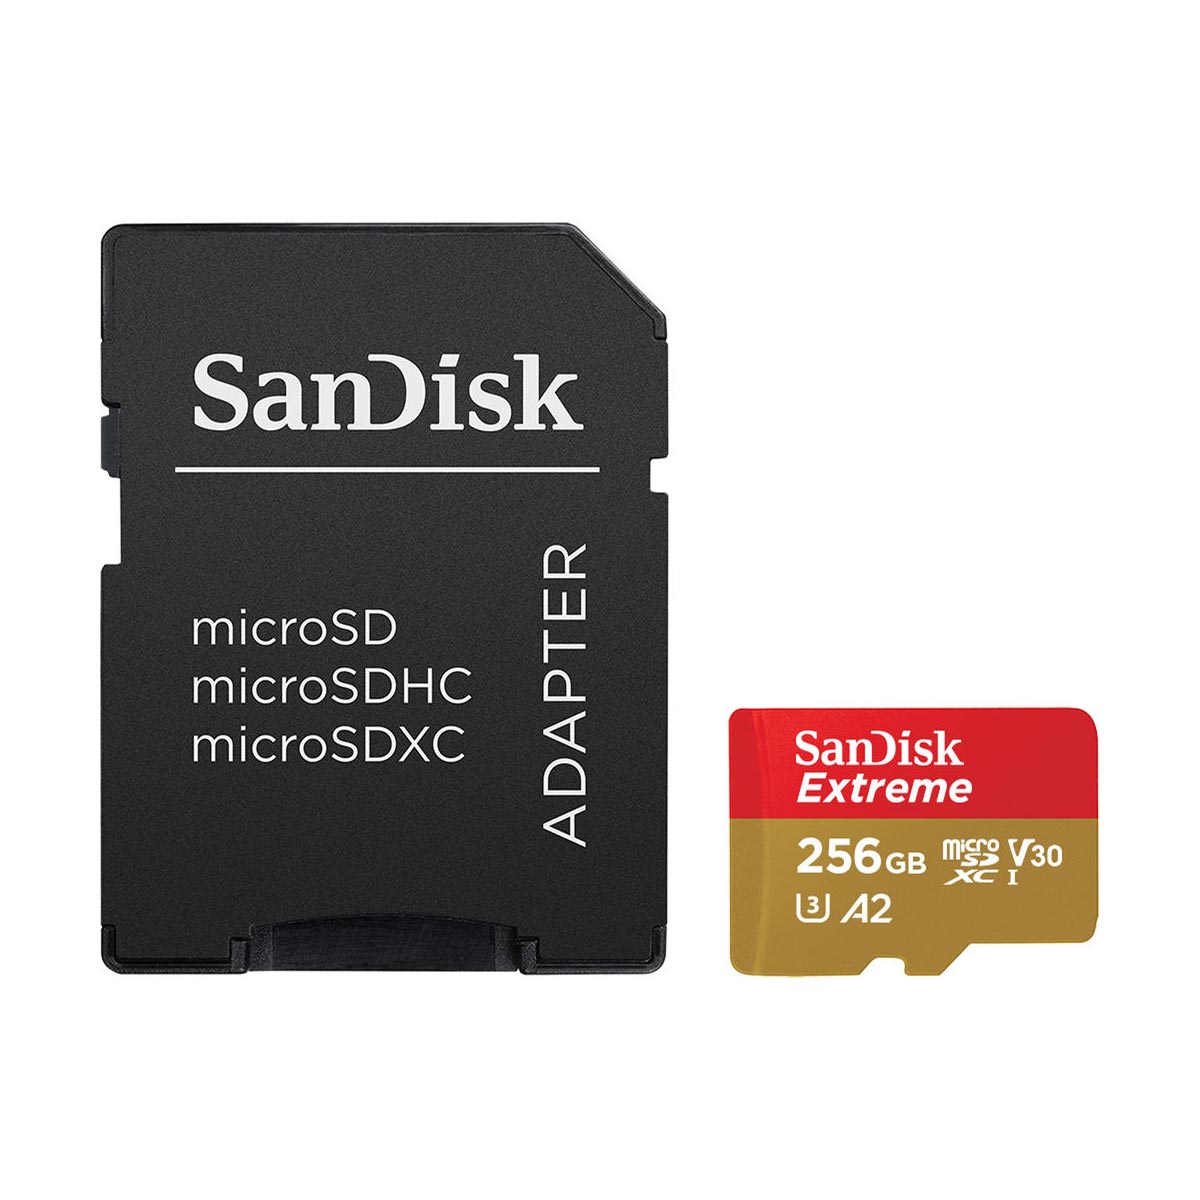 SanDisk 256GB Extreme UHS-I microSDXC (V30) 190mb/s Memory Card with SD Adapter